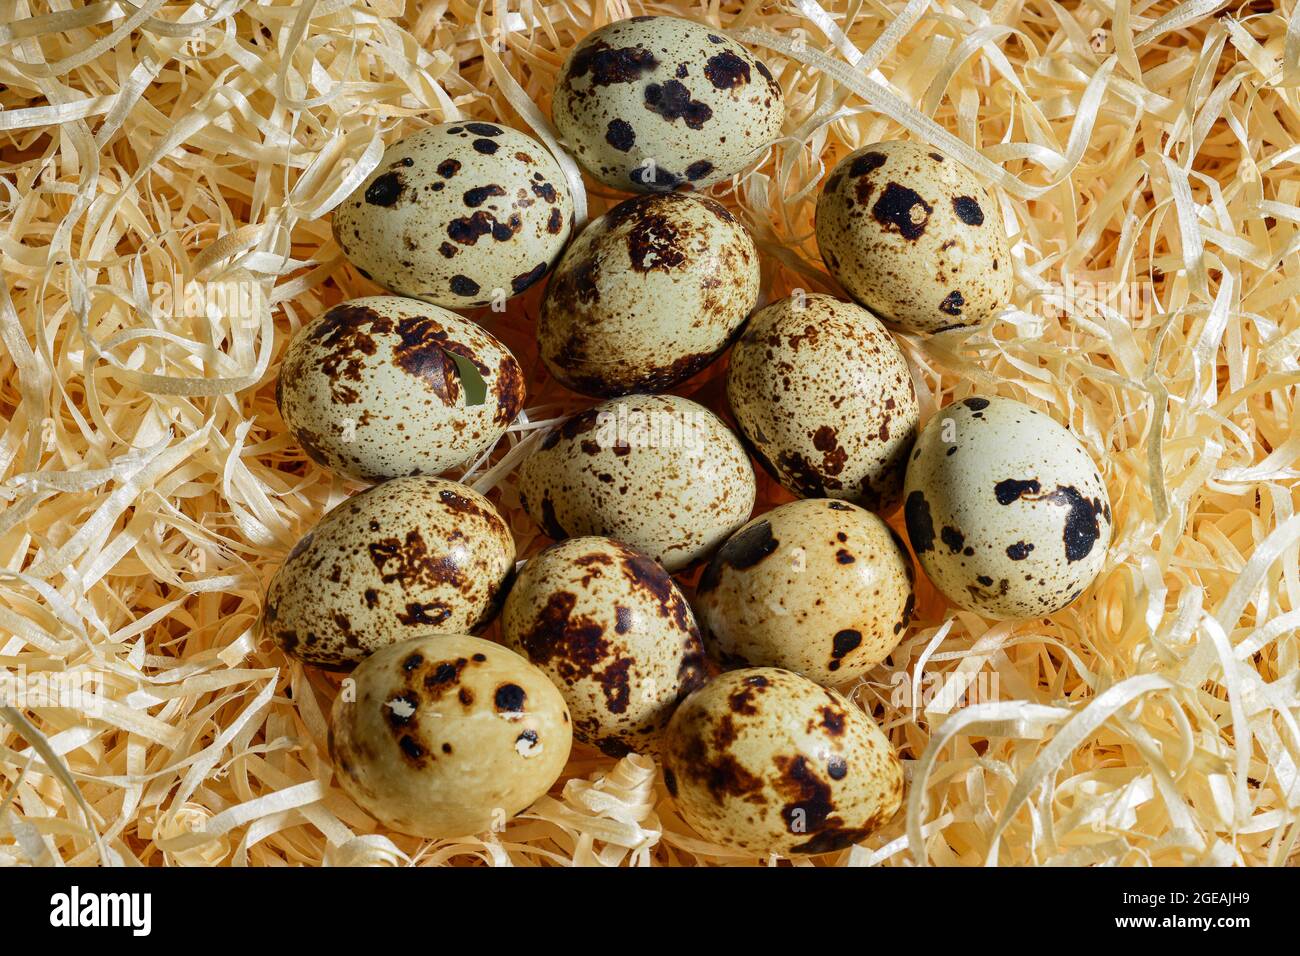 broken quail egg with whole eggs on wood shavings, top view close-up Stock Photo